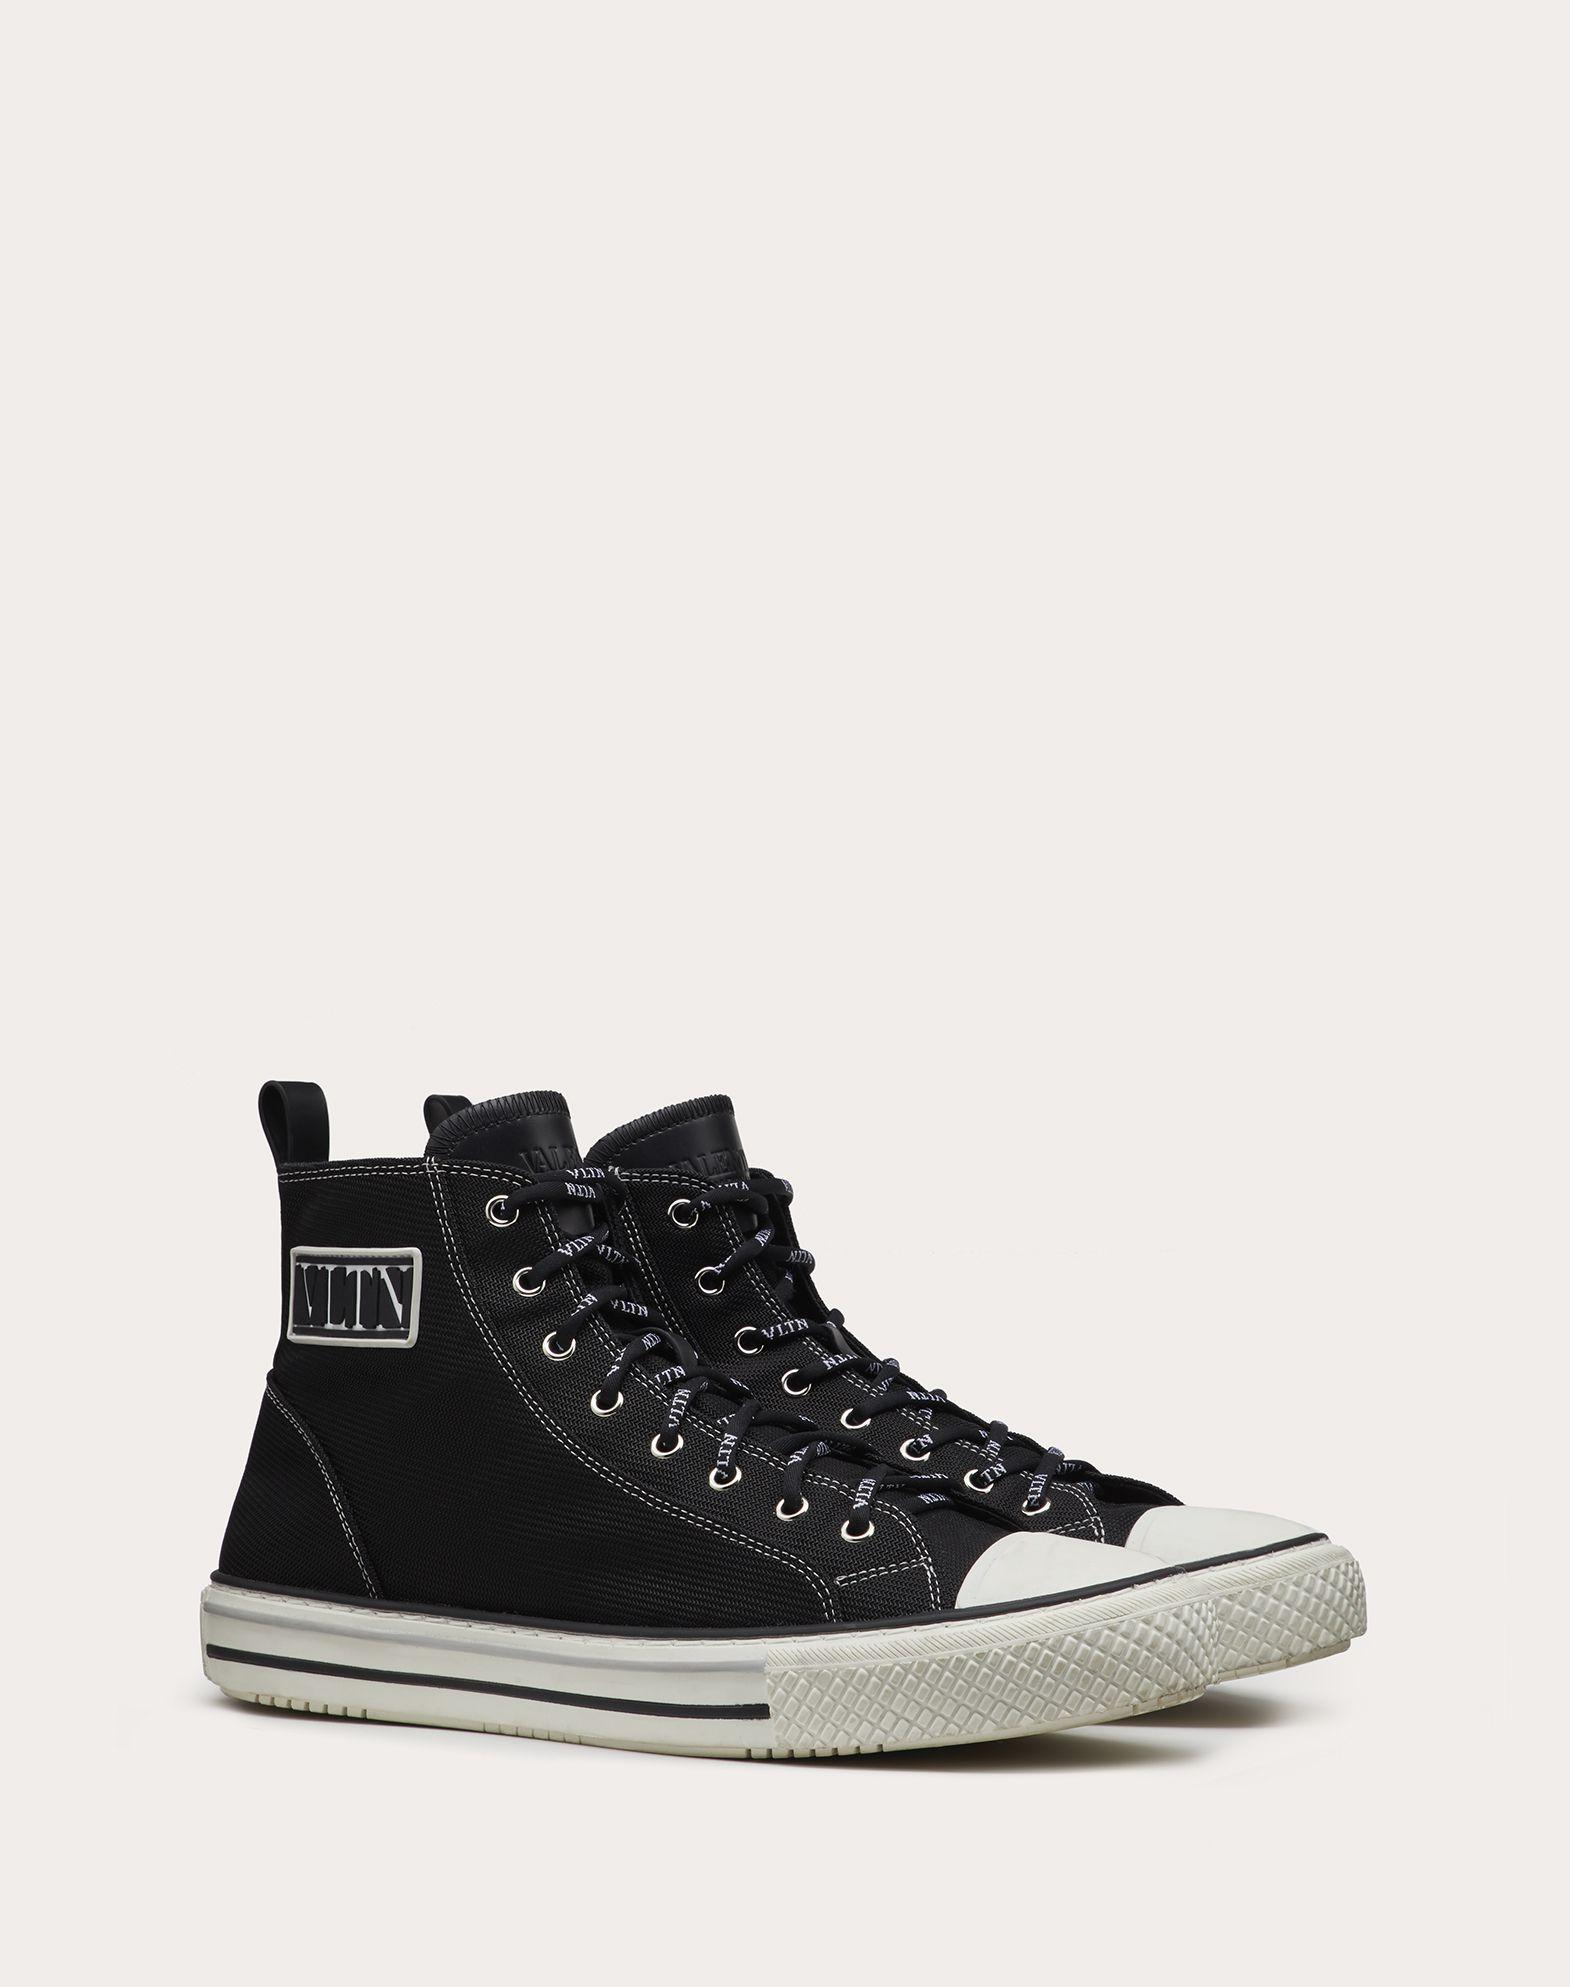 Valentino giggies High-top Fabric Sneaker in Black for Men - Lyst